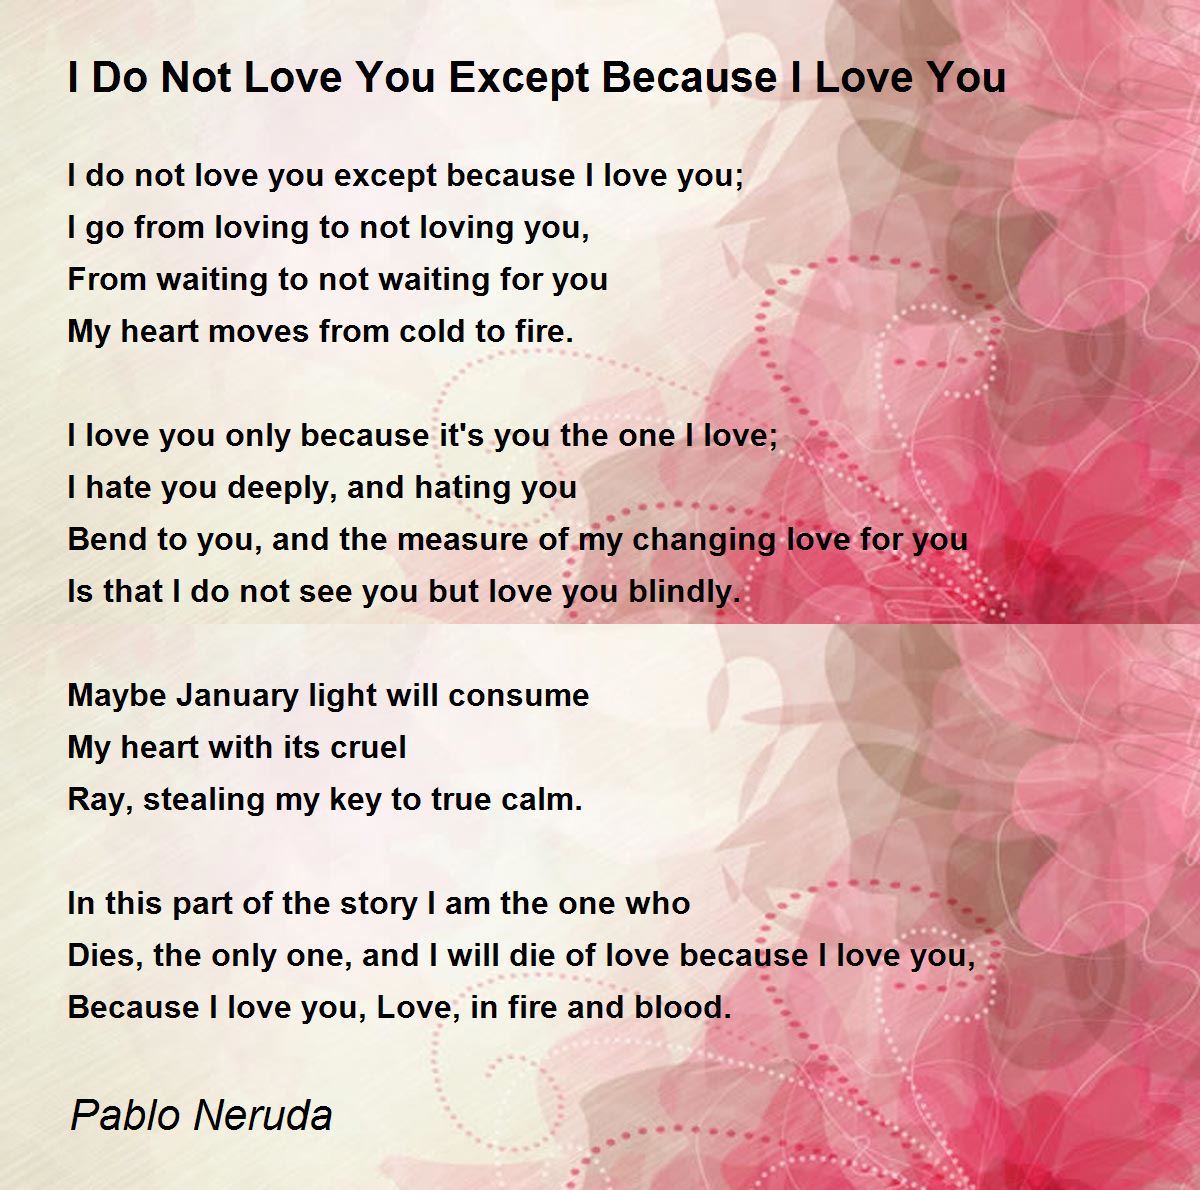 M love you poems i with in 44 I